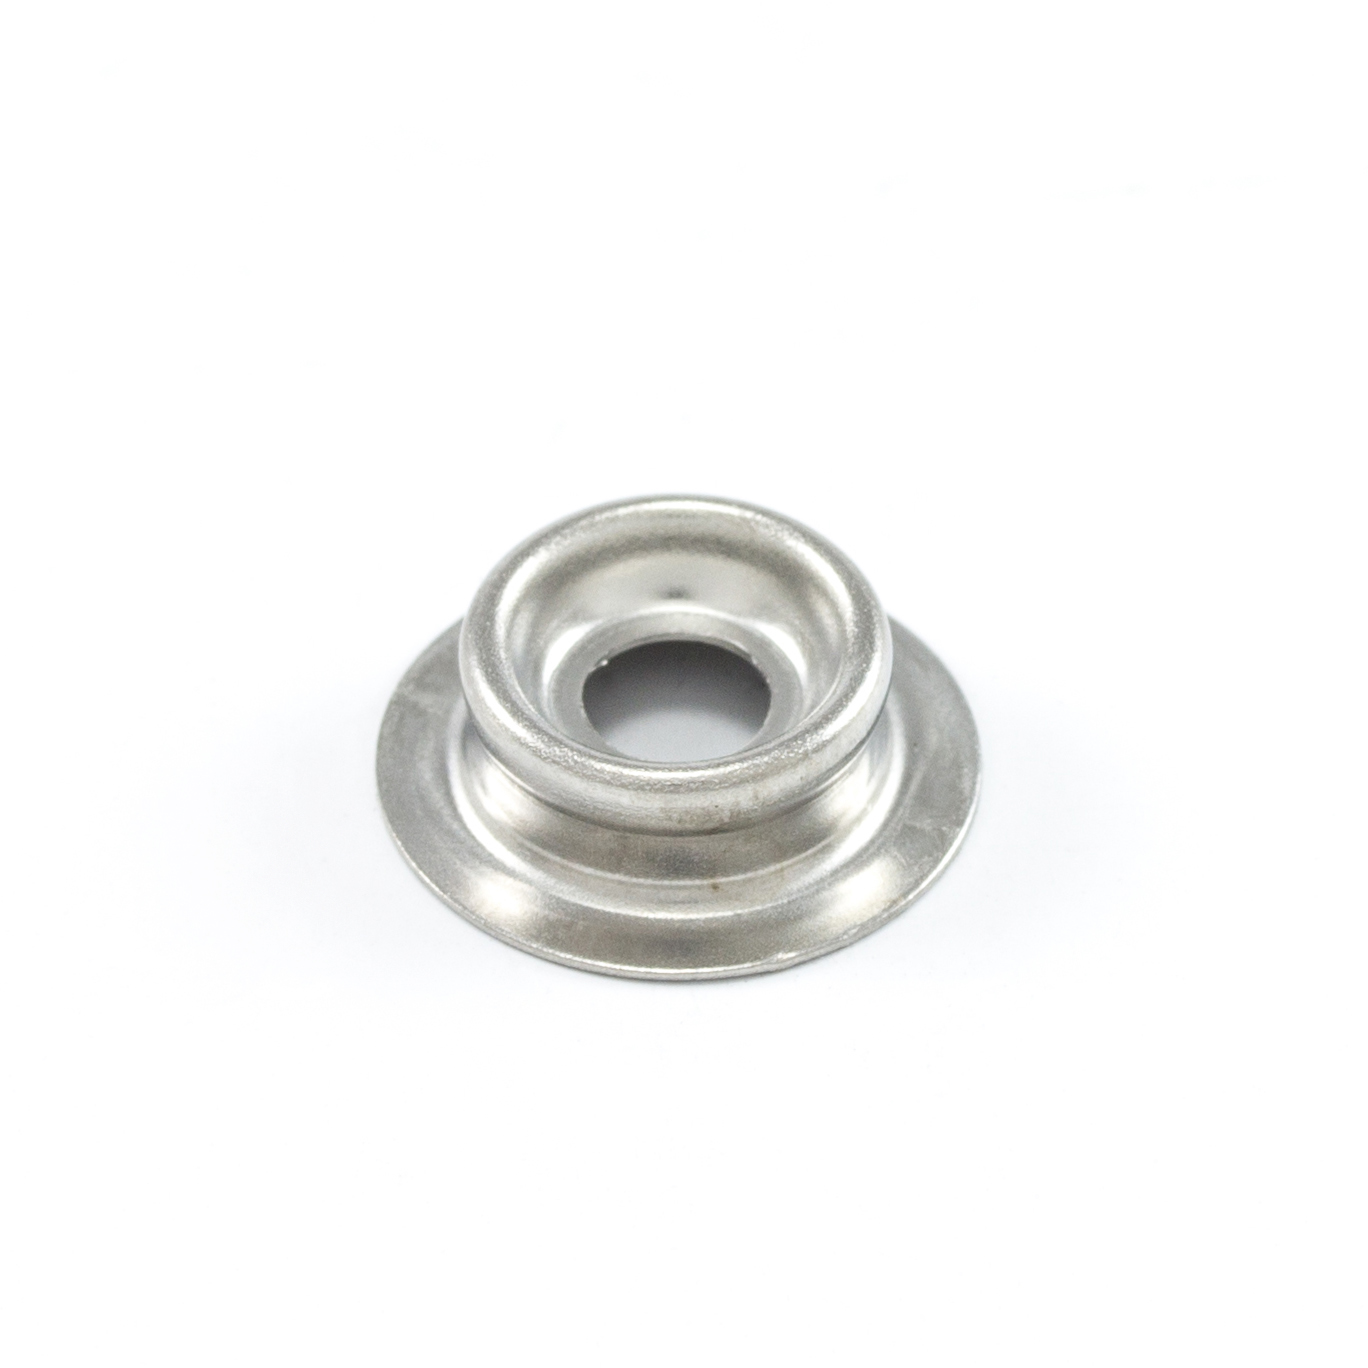 DOT Durable Stud 93-ZS-10370-1U 316 Stainless Steel (100 pack)